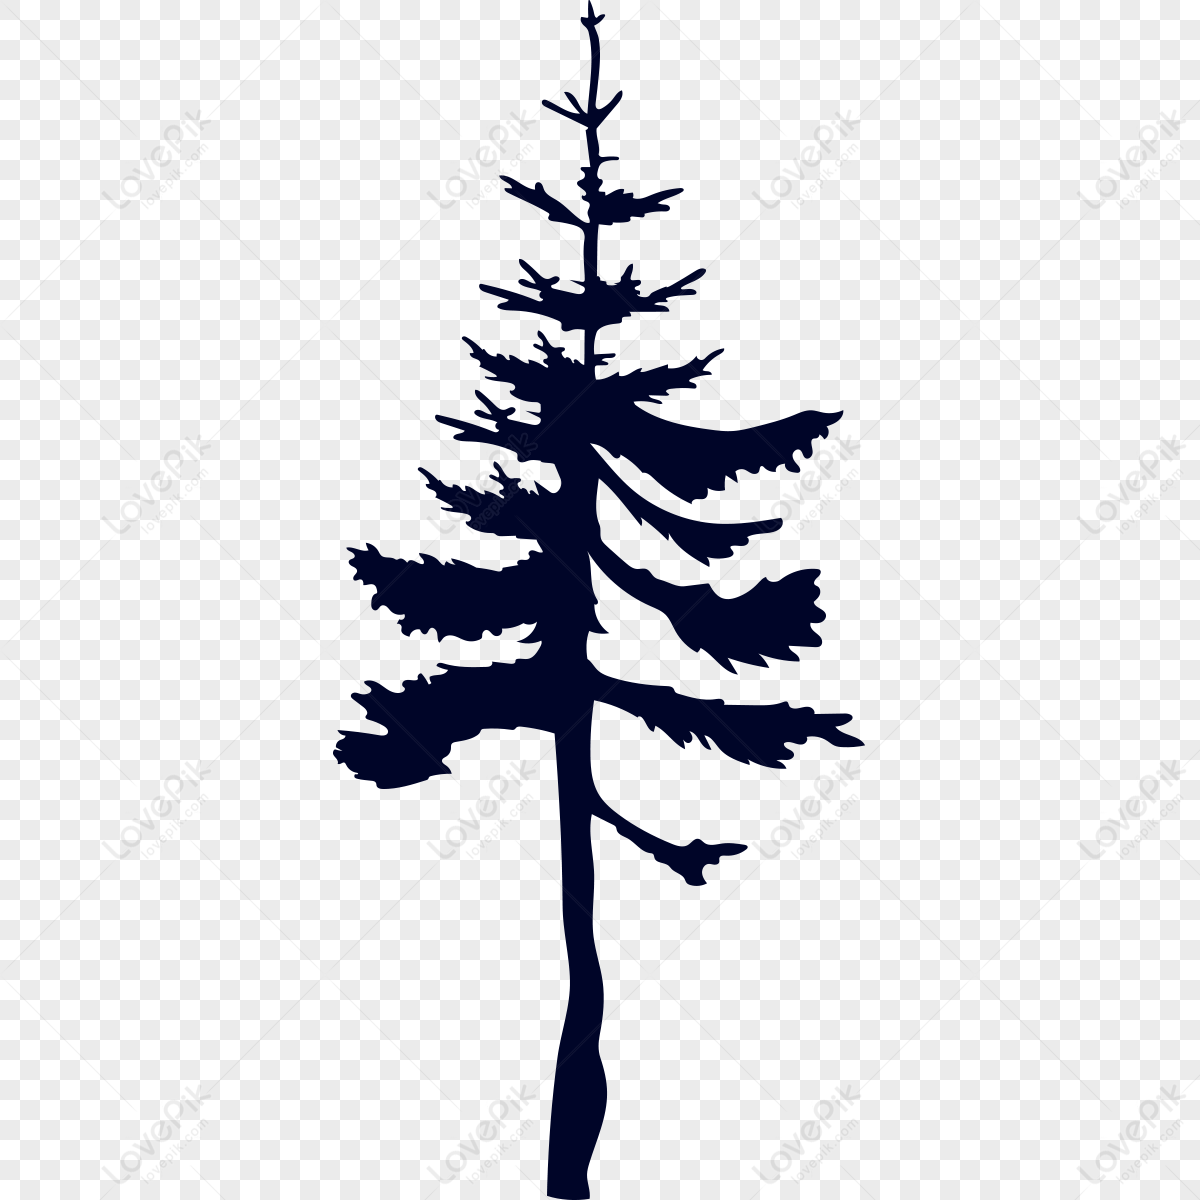 Pine tree silhouette, tree, material, pine tree silhouette png picture